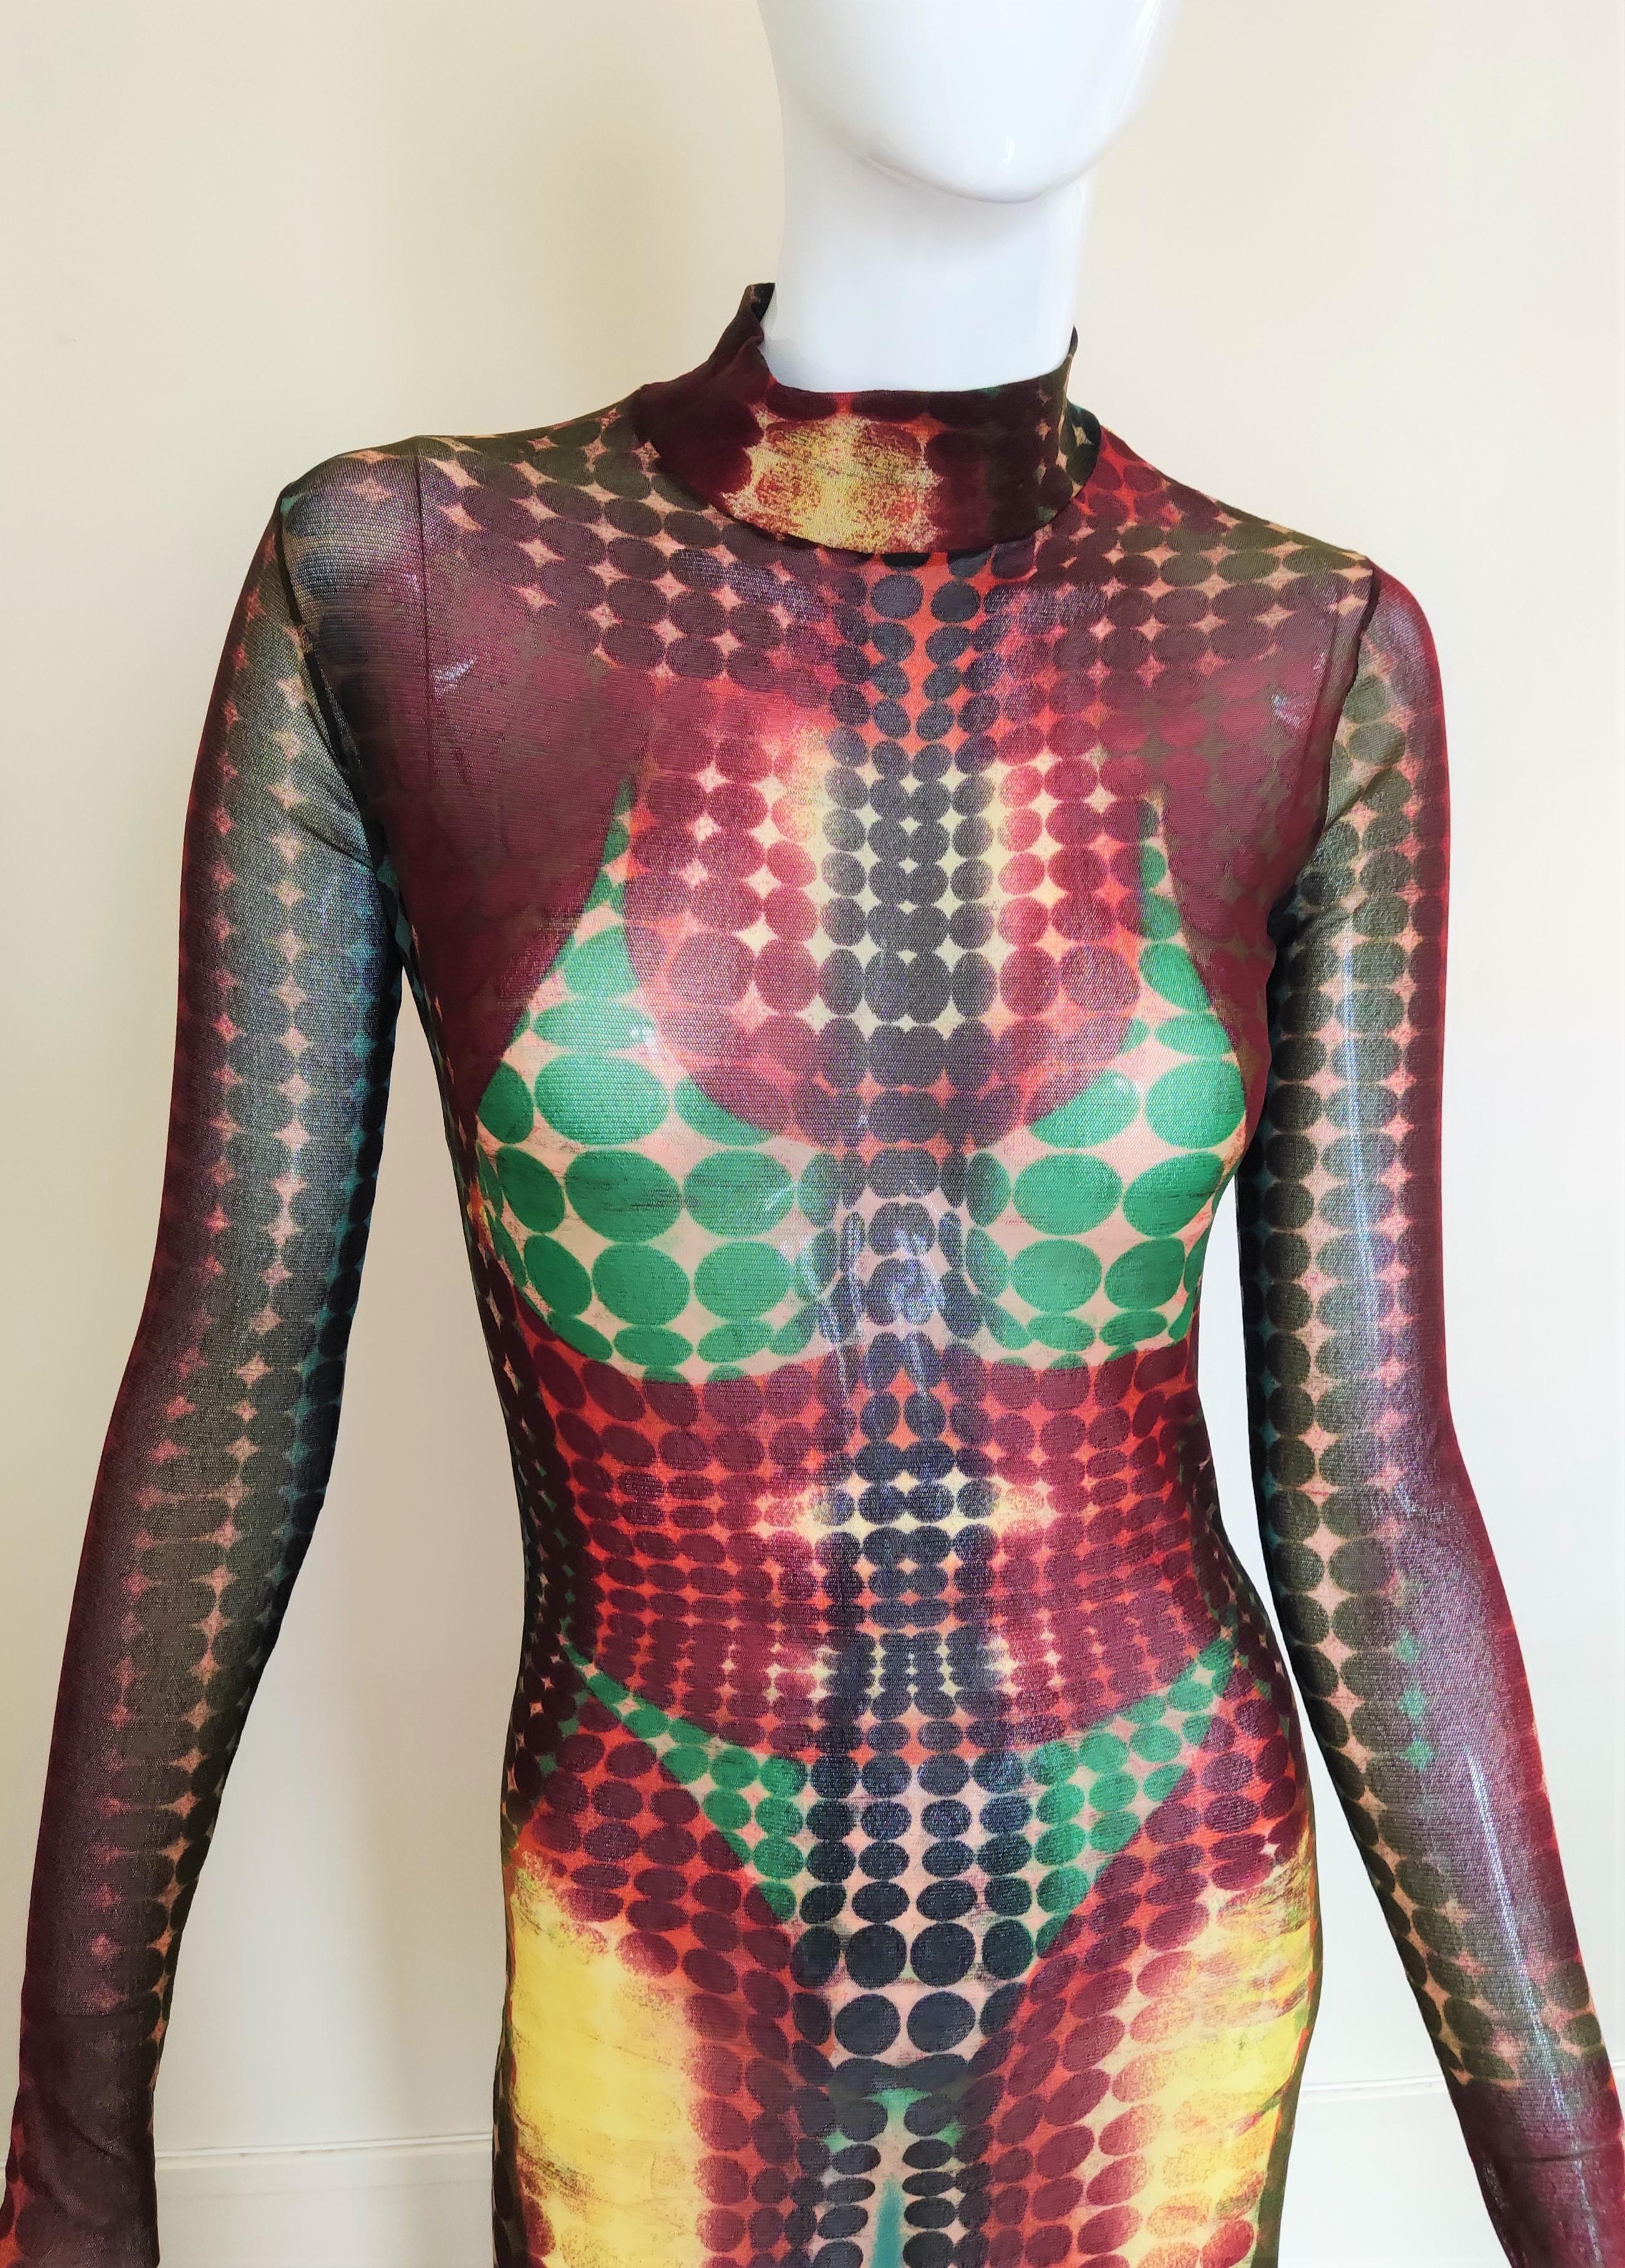 Iconic Jean Paul Gaultier Cyberdot 1995 F/W Runway Haute Couture Mad Max Victor  For Sale 2